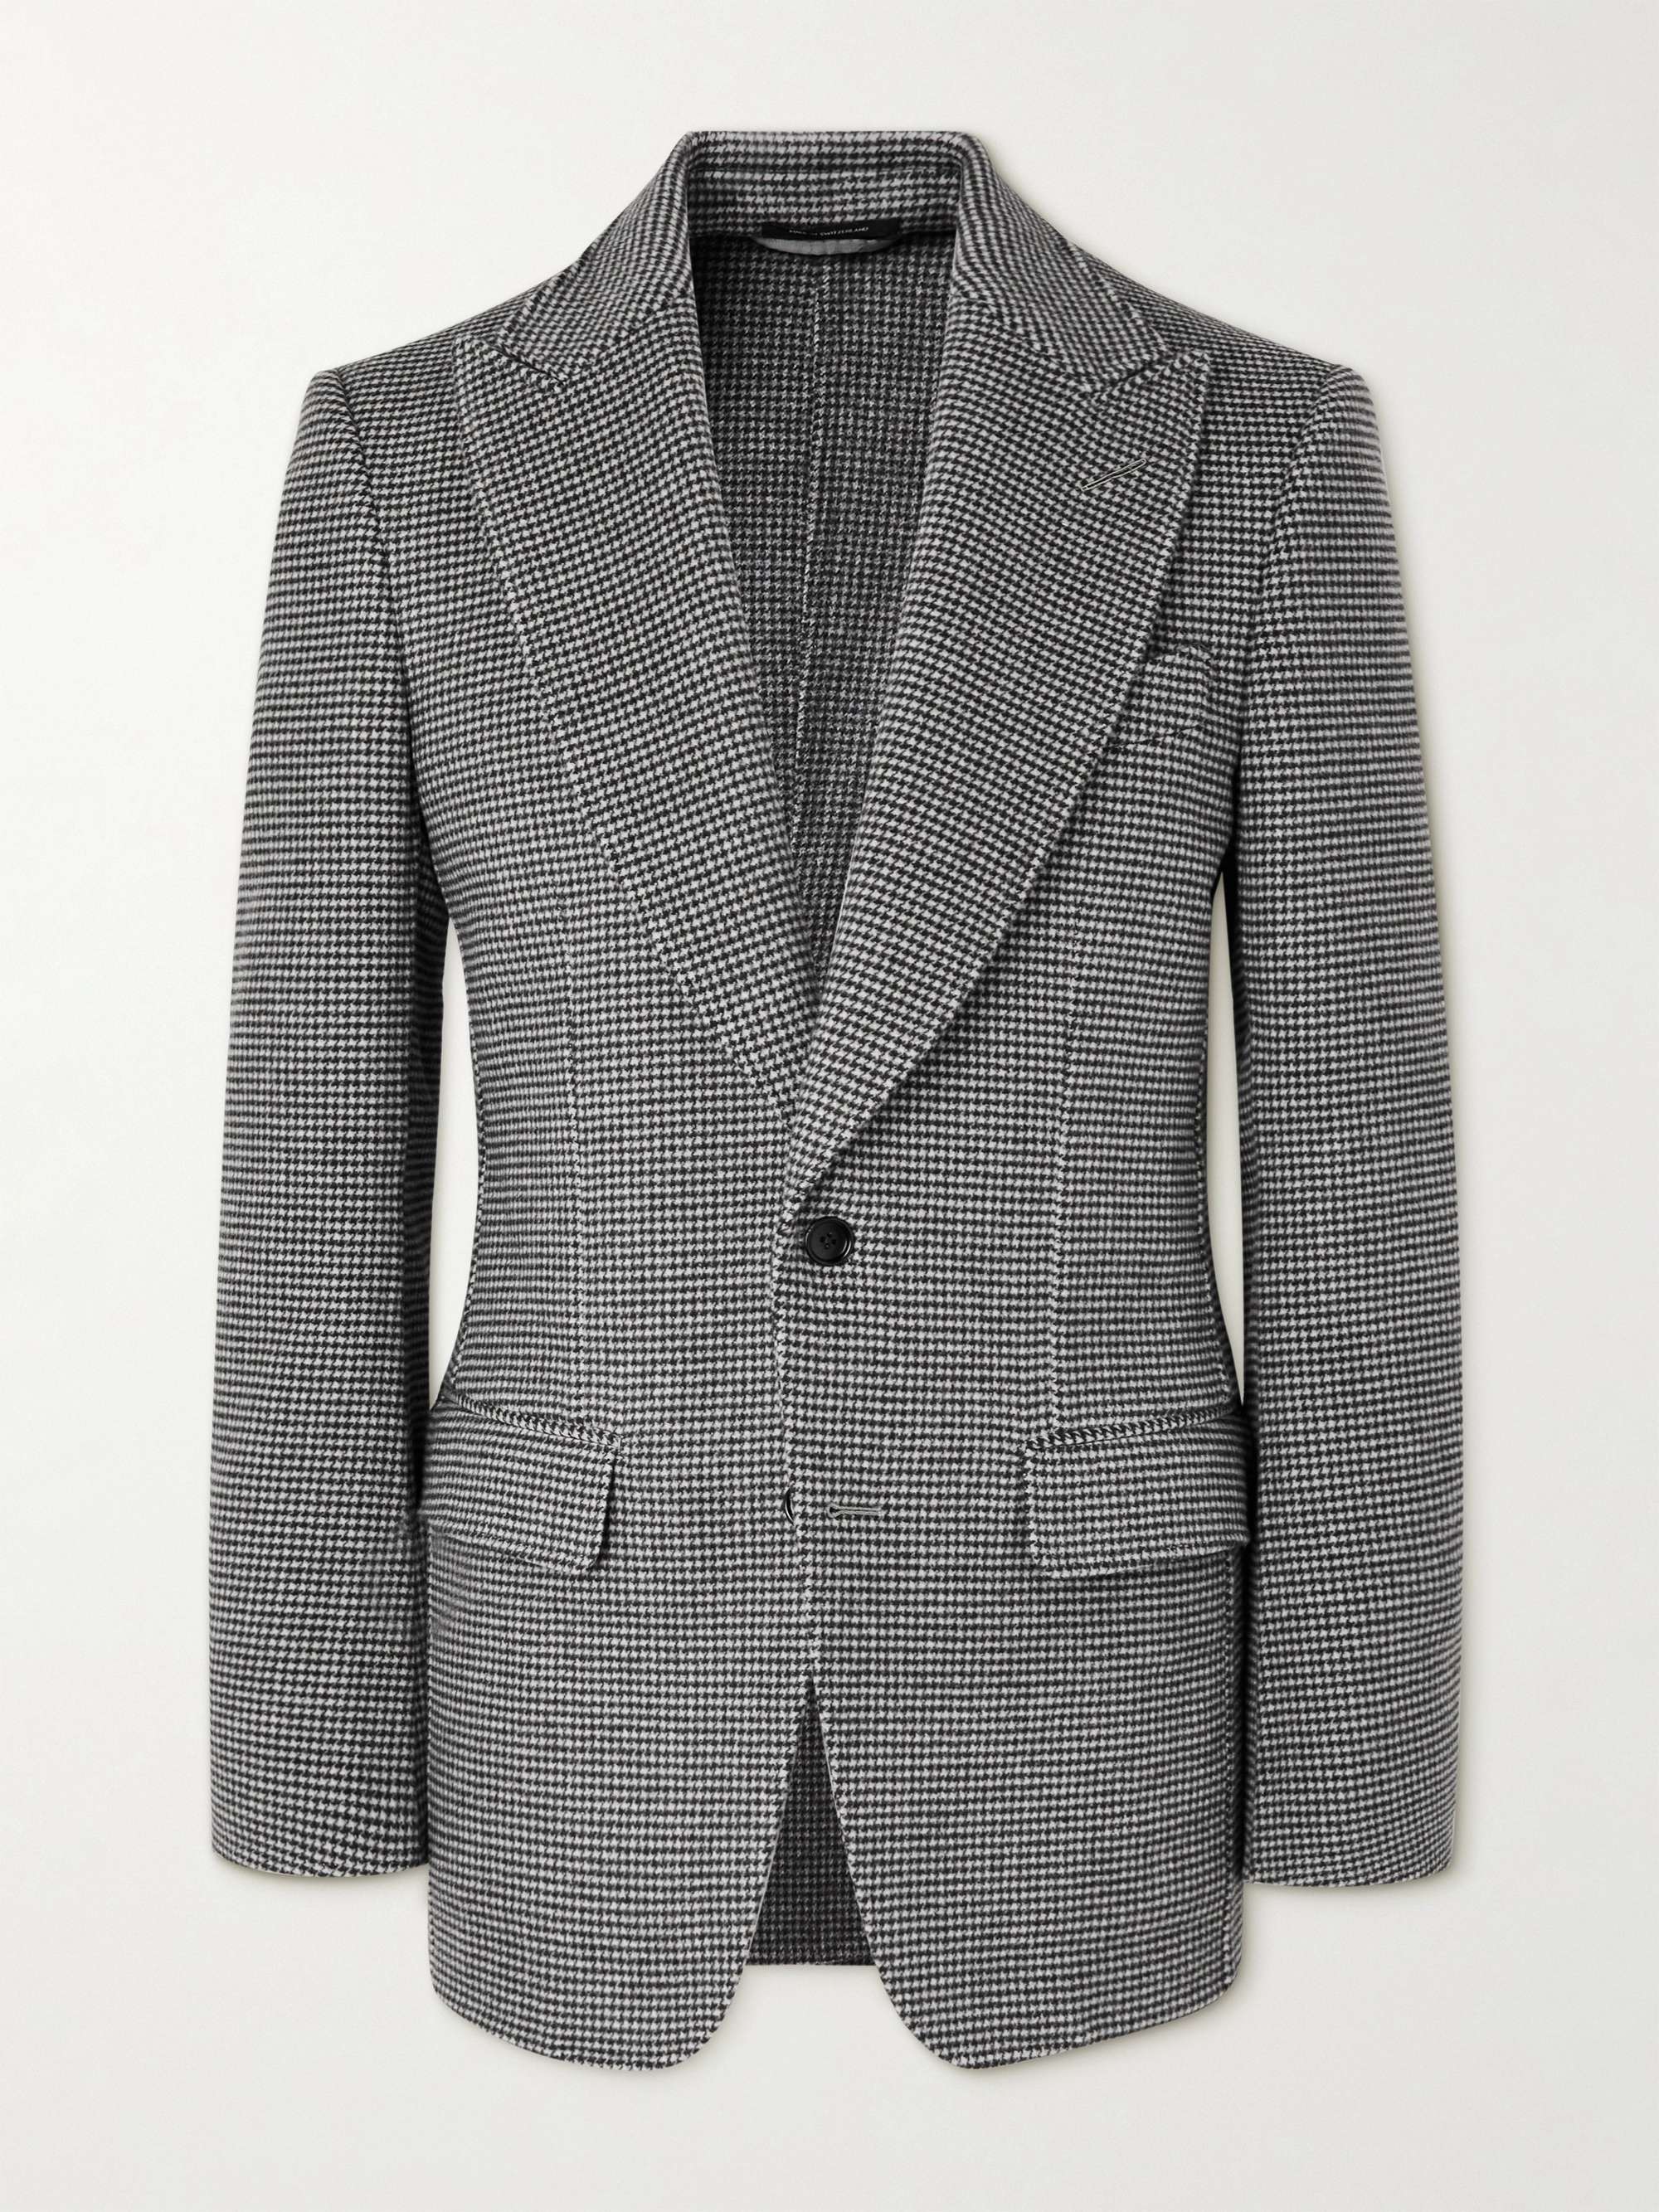 TOM FORD Houndstooth Wool and Cashmere-Blend Blazer